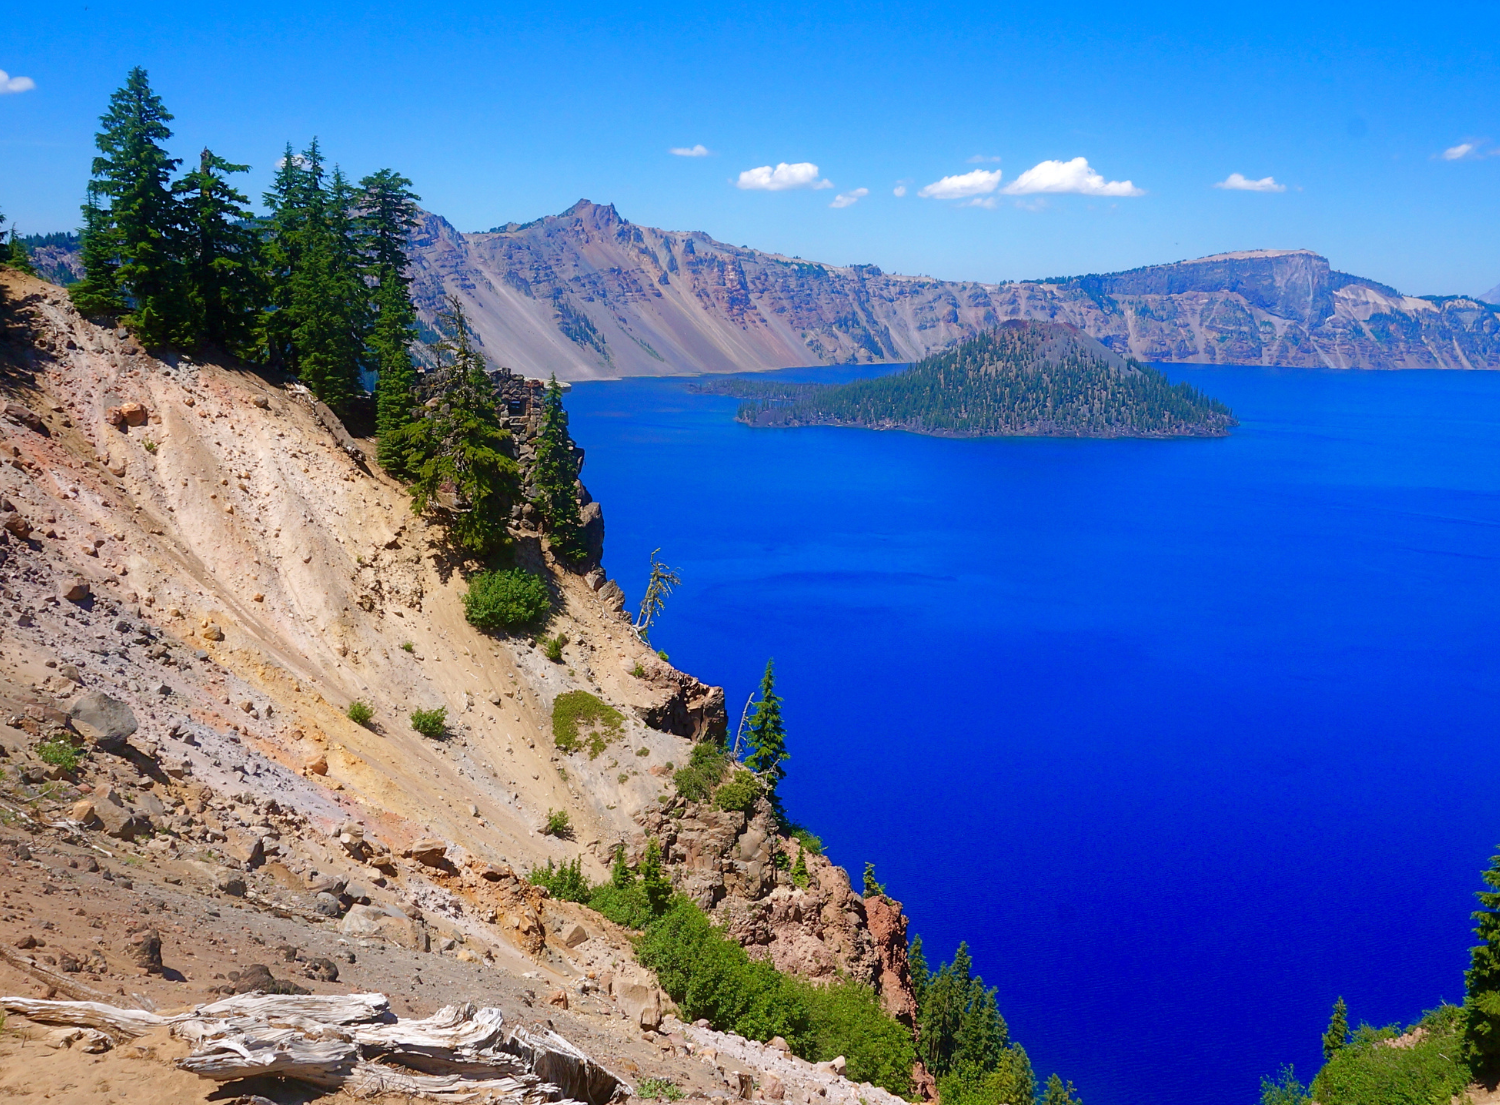 Cliffside and lake view of Crater Lake National Park, Oregon